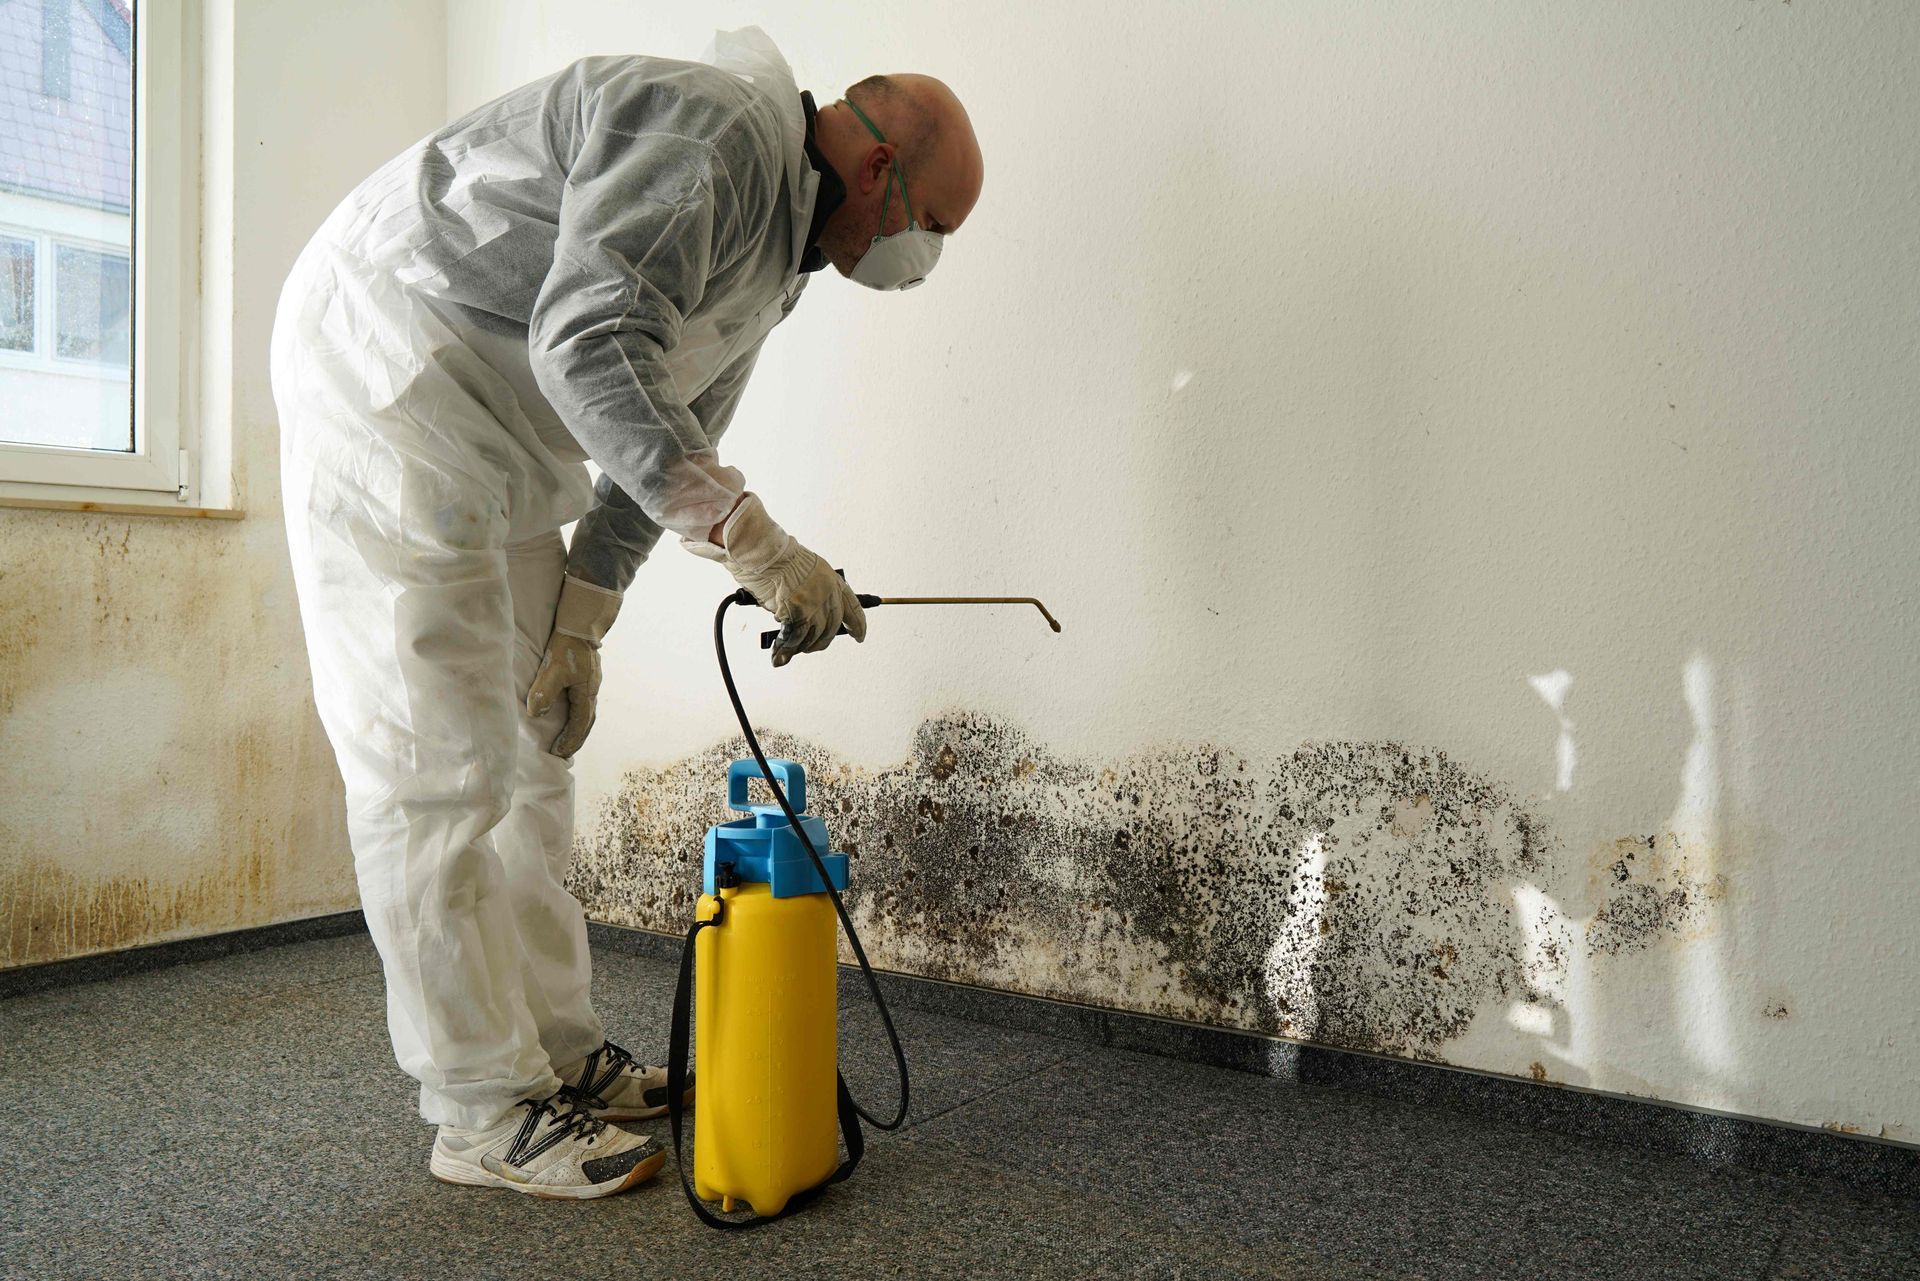 A man is spraying mold on a wall with a sprayer